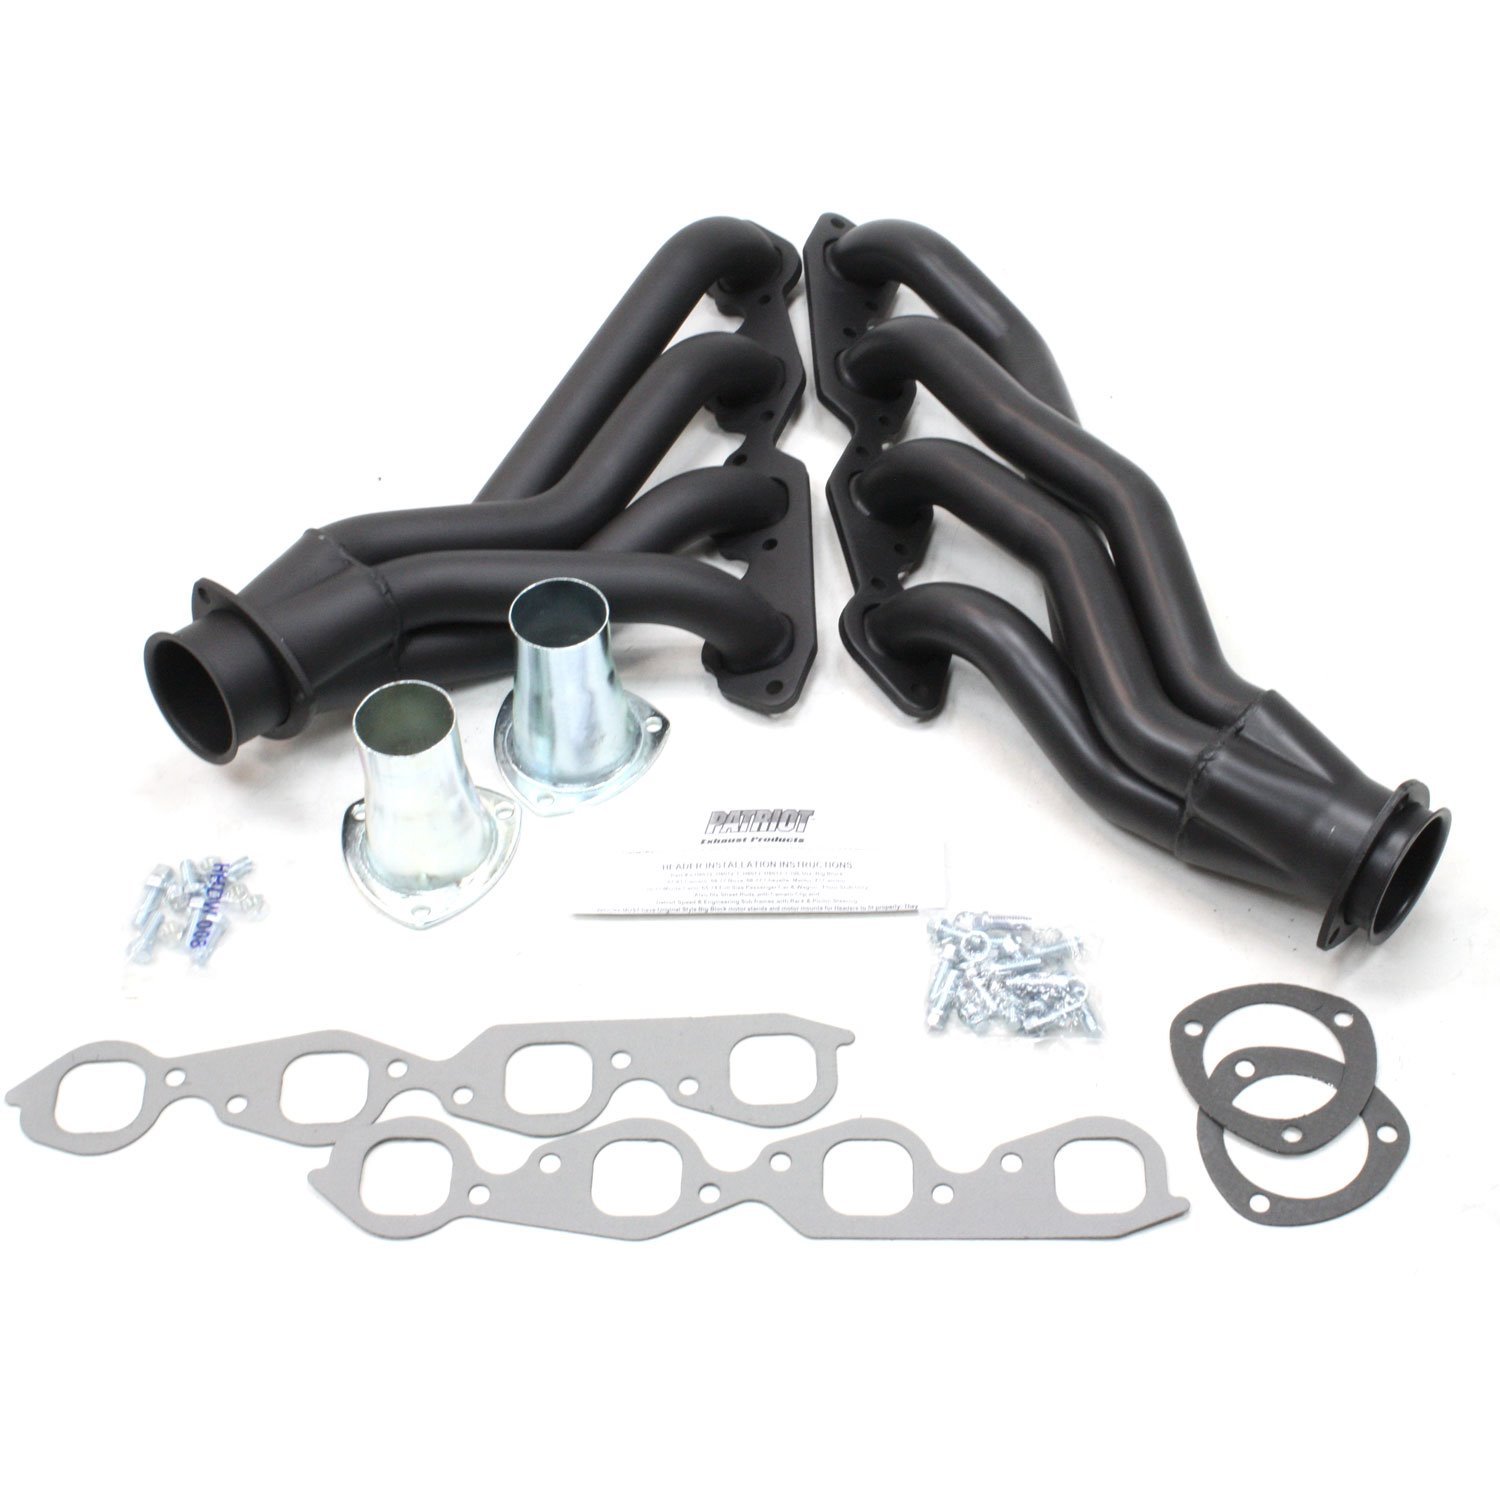 GM Specific Fit Headers 1965-1974 Full Size Passenger